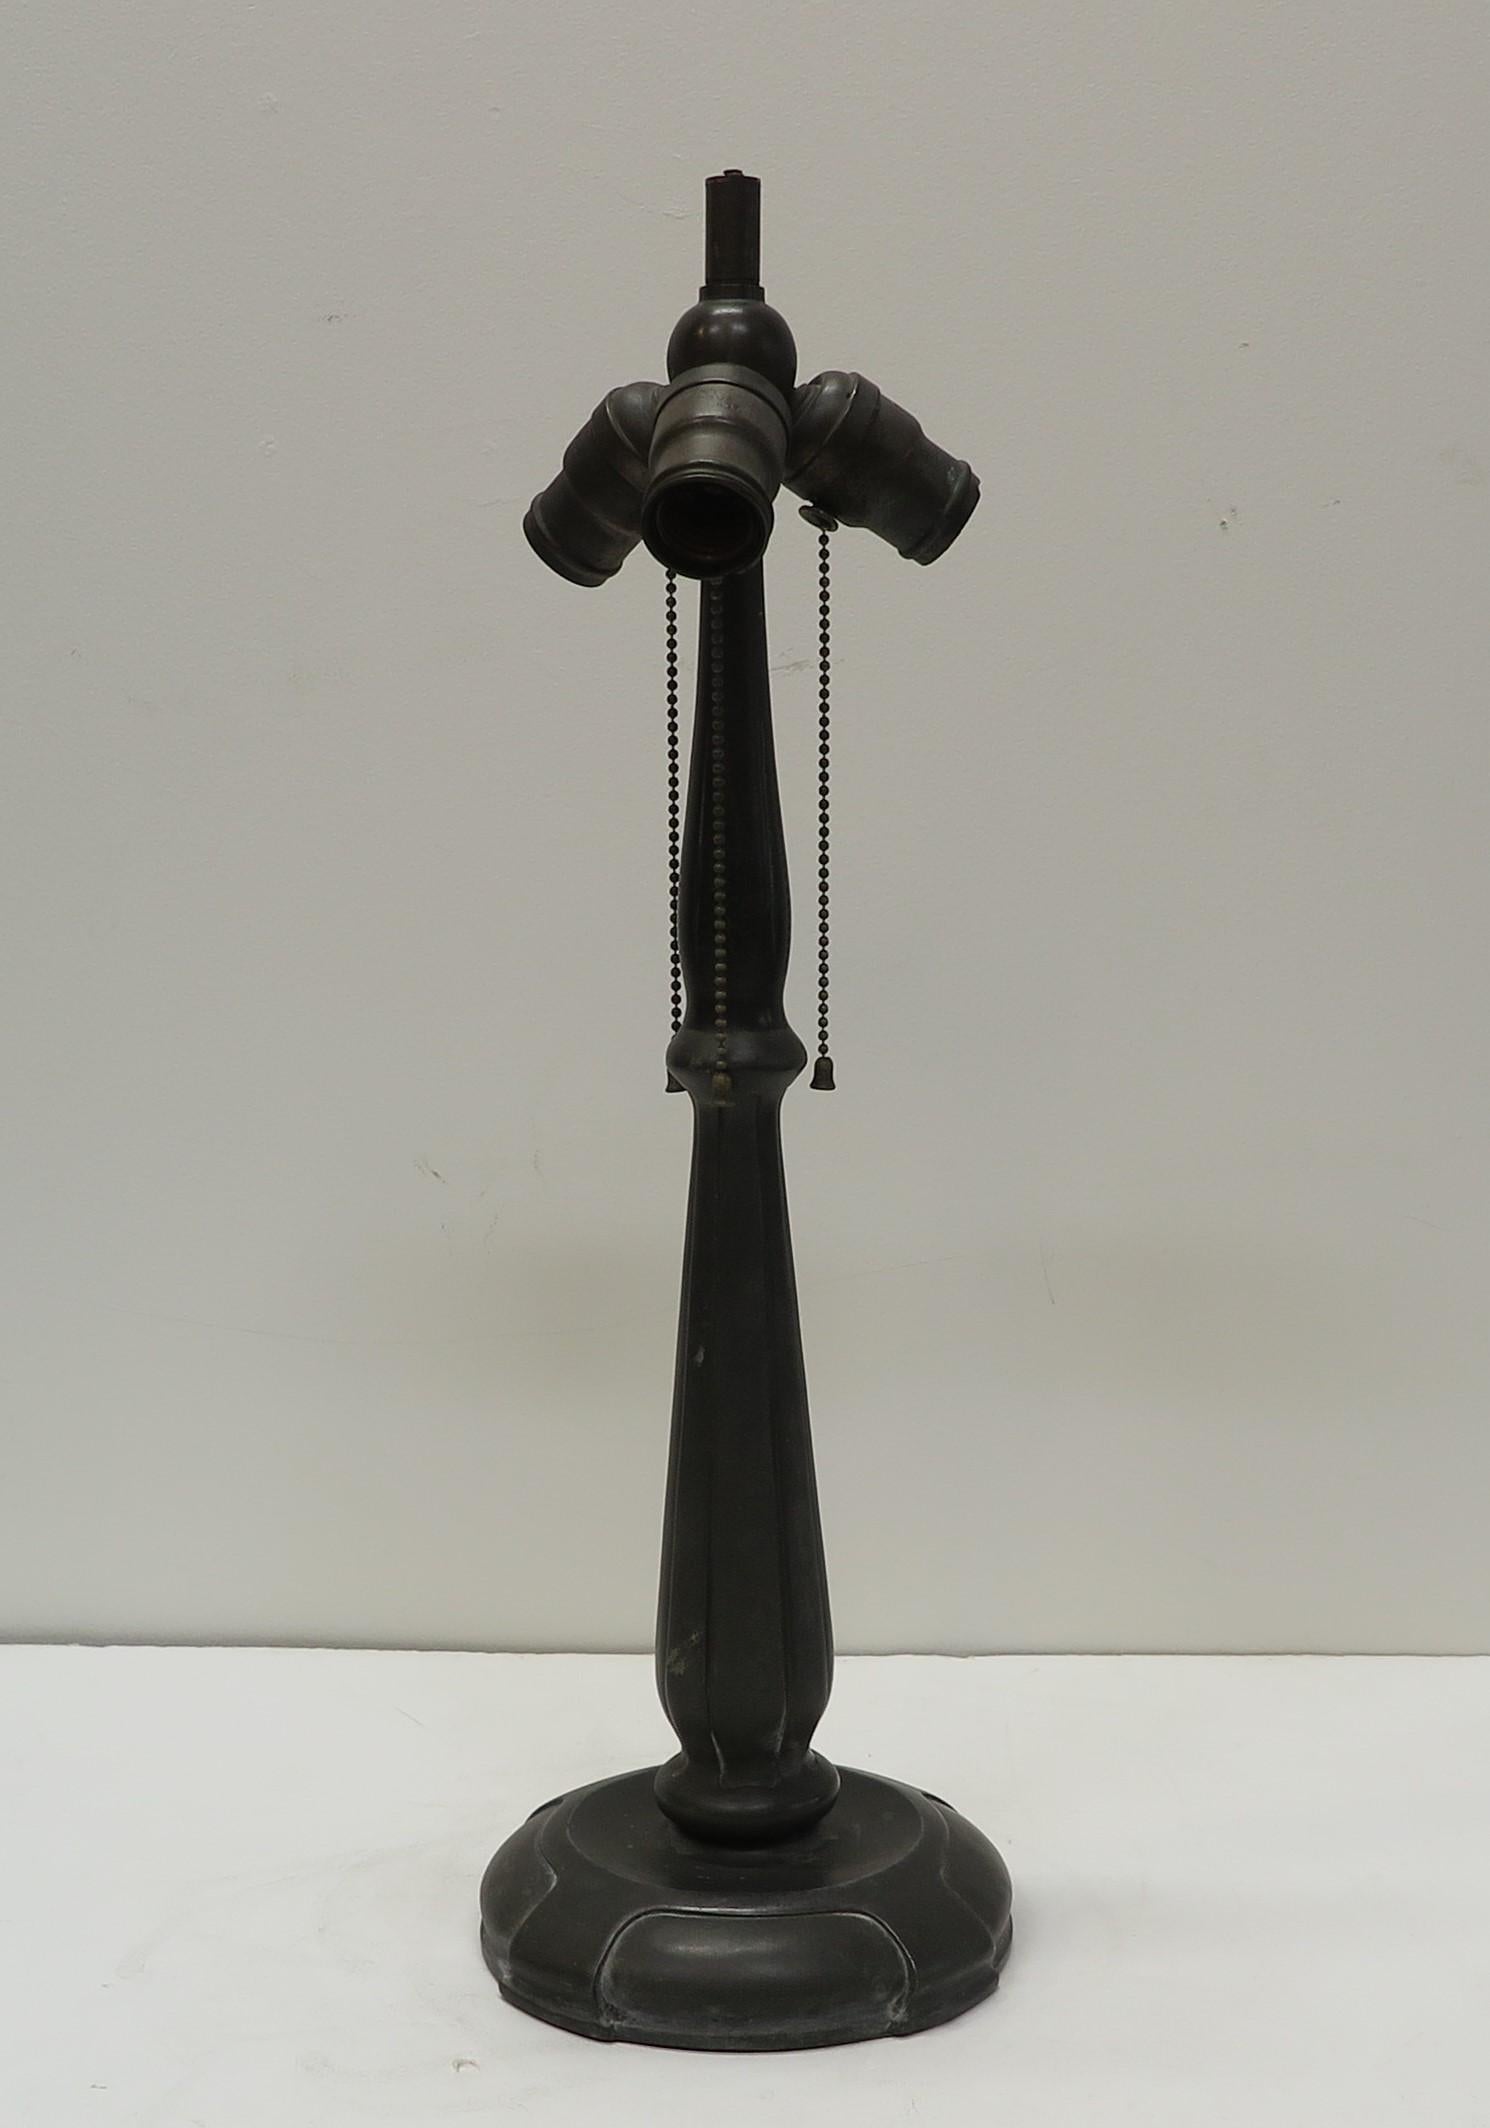 Handel Bronze Table Lamp. Handel Bronze cast Table Lamp with rare signature stamped on the side of the lower base. This Handel mark is not seen often indicates early production. Lamp maintains original sockets and wire. In good original working